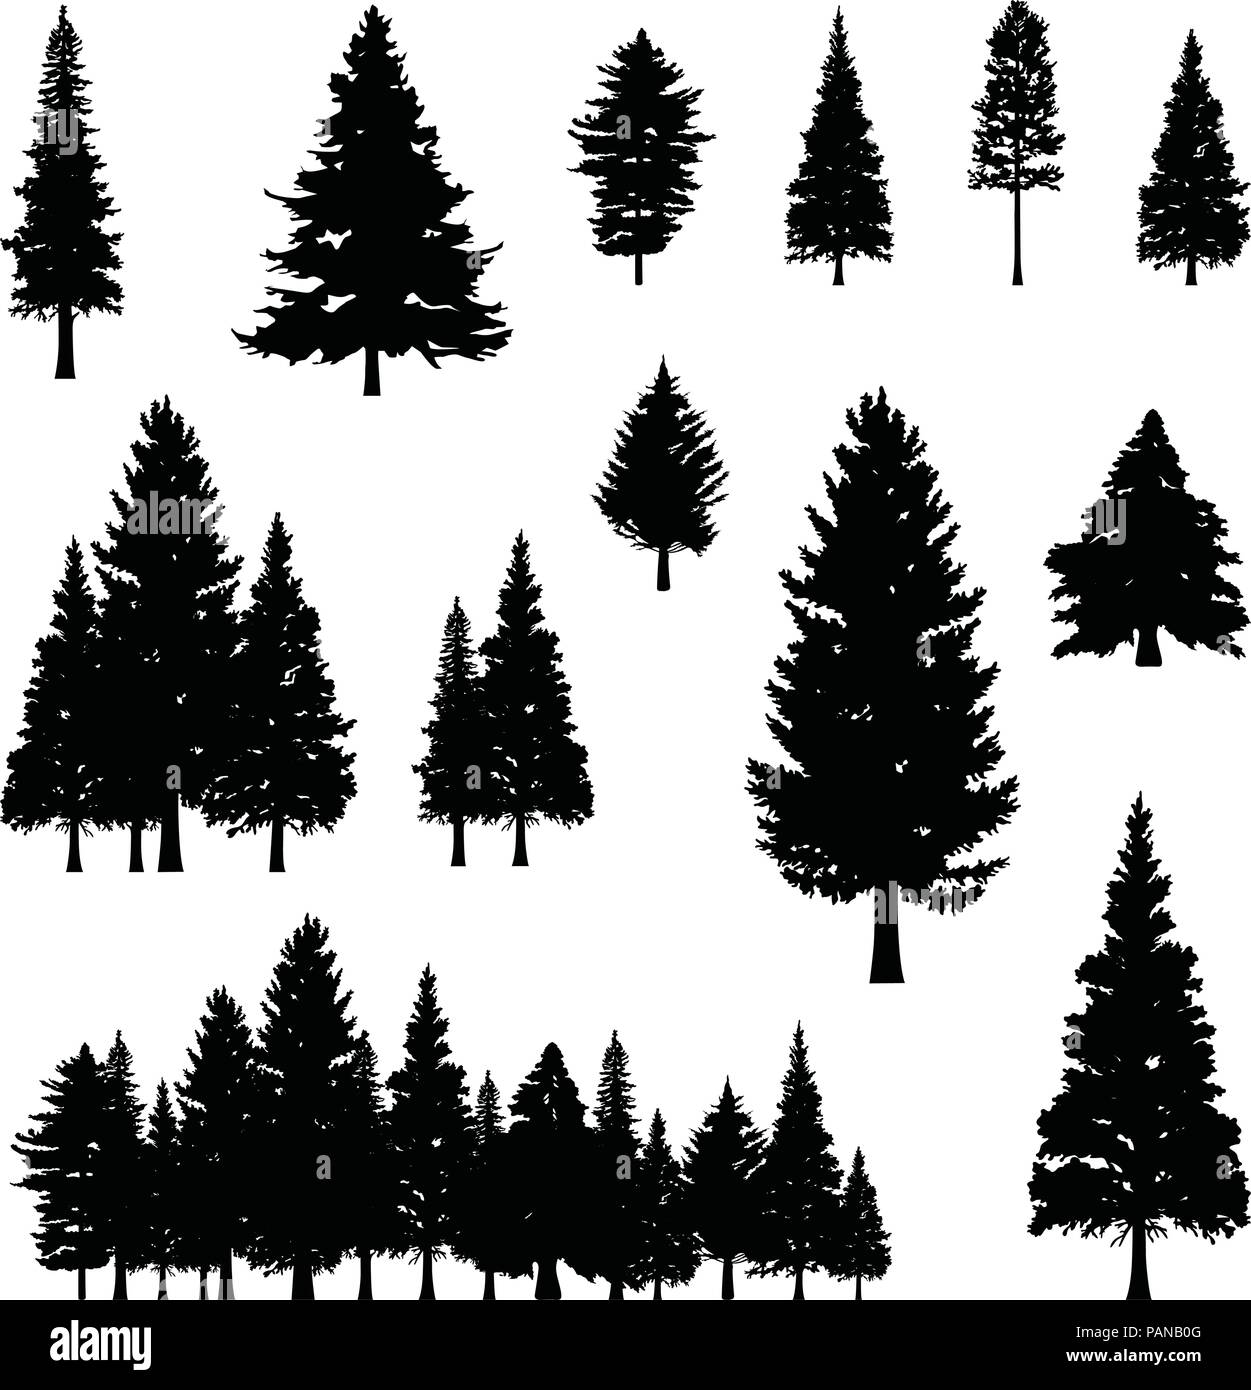 Coniferous Pine Fir Conifer Tree Forest Silhouette Illustration Stock Vector